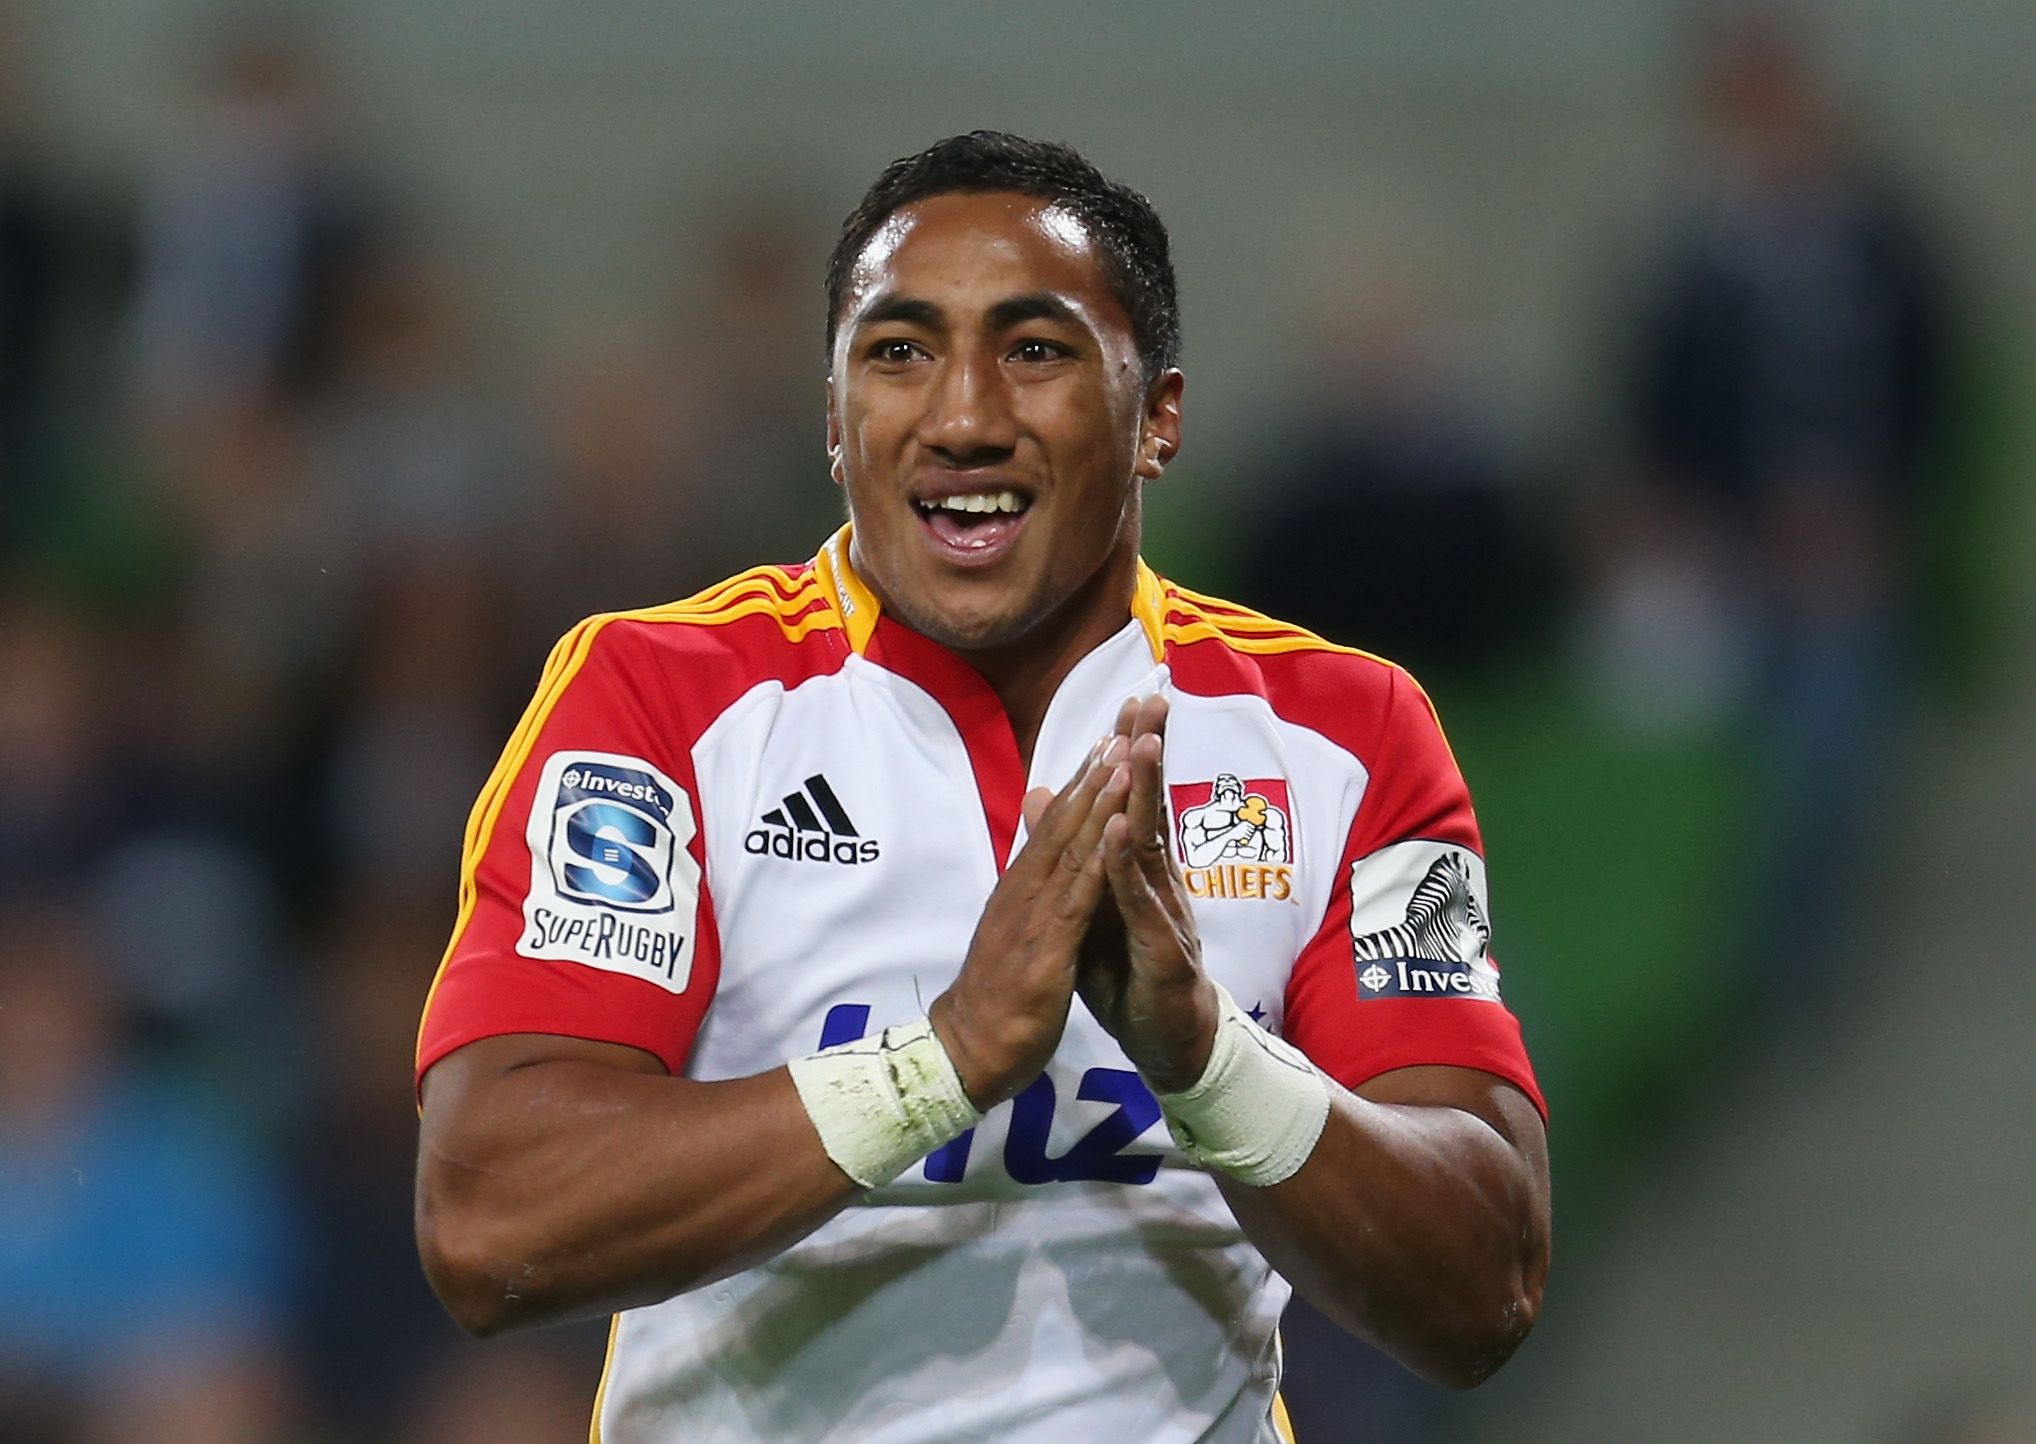 MELBOURNE, AUSTRALIA - MAY 03: Bundee Aki of the Chiefs gestures after scoring a try during the round 12 Super Rugby match between the Rebels and the Chiefs at AAMI Park on May 3, 2013 in Melbourne, Australia. (Photo by Scott Barbour/Getty Images)